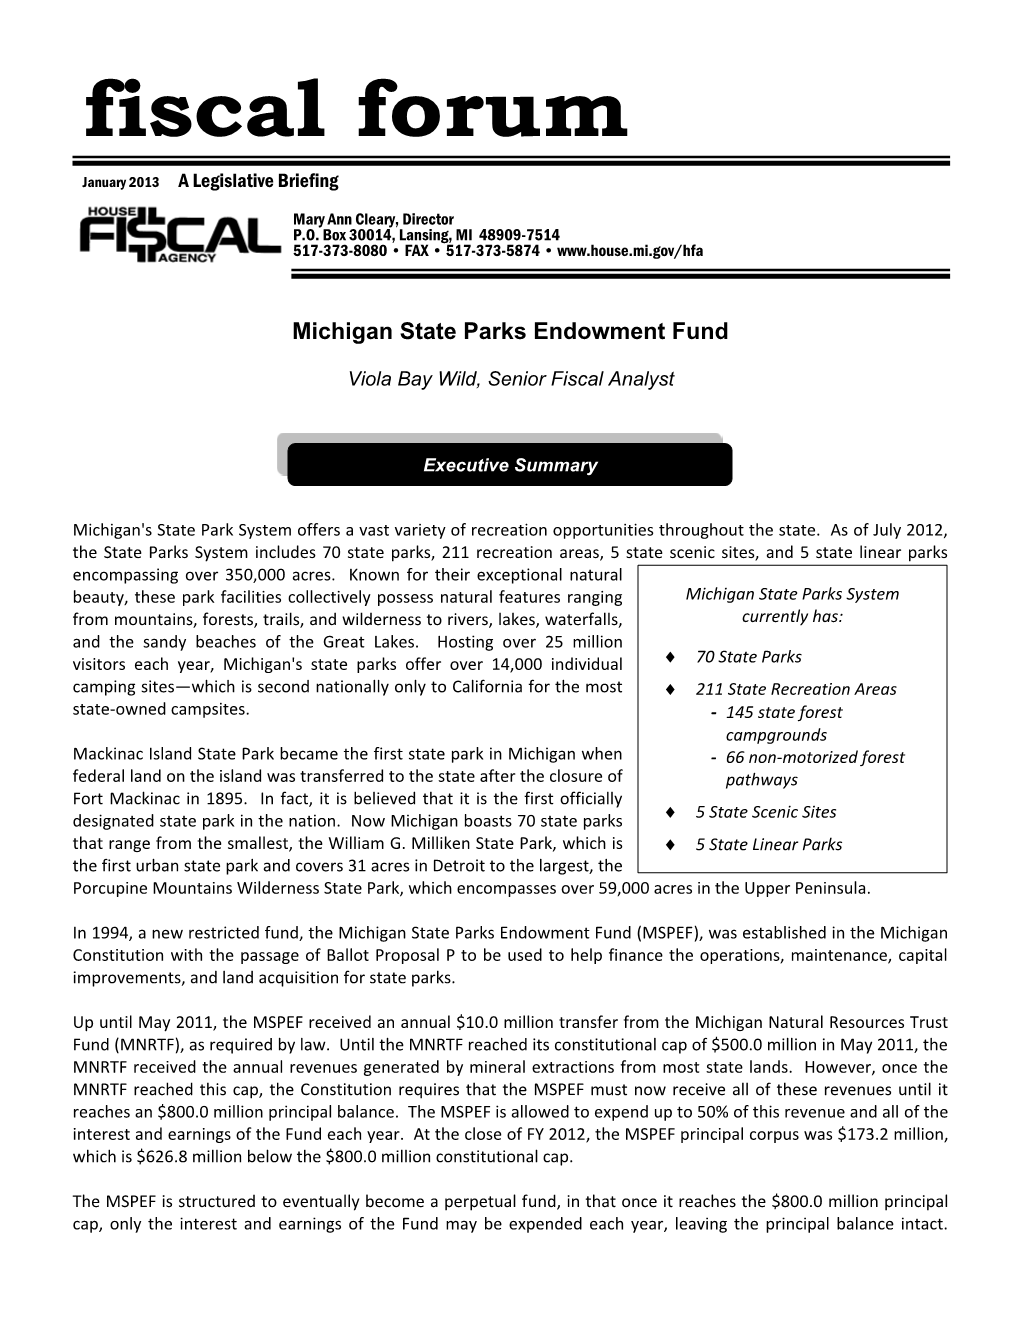 Fiscal Forum: Michigan State Parks Endowment Fund